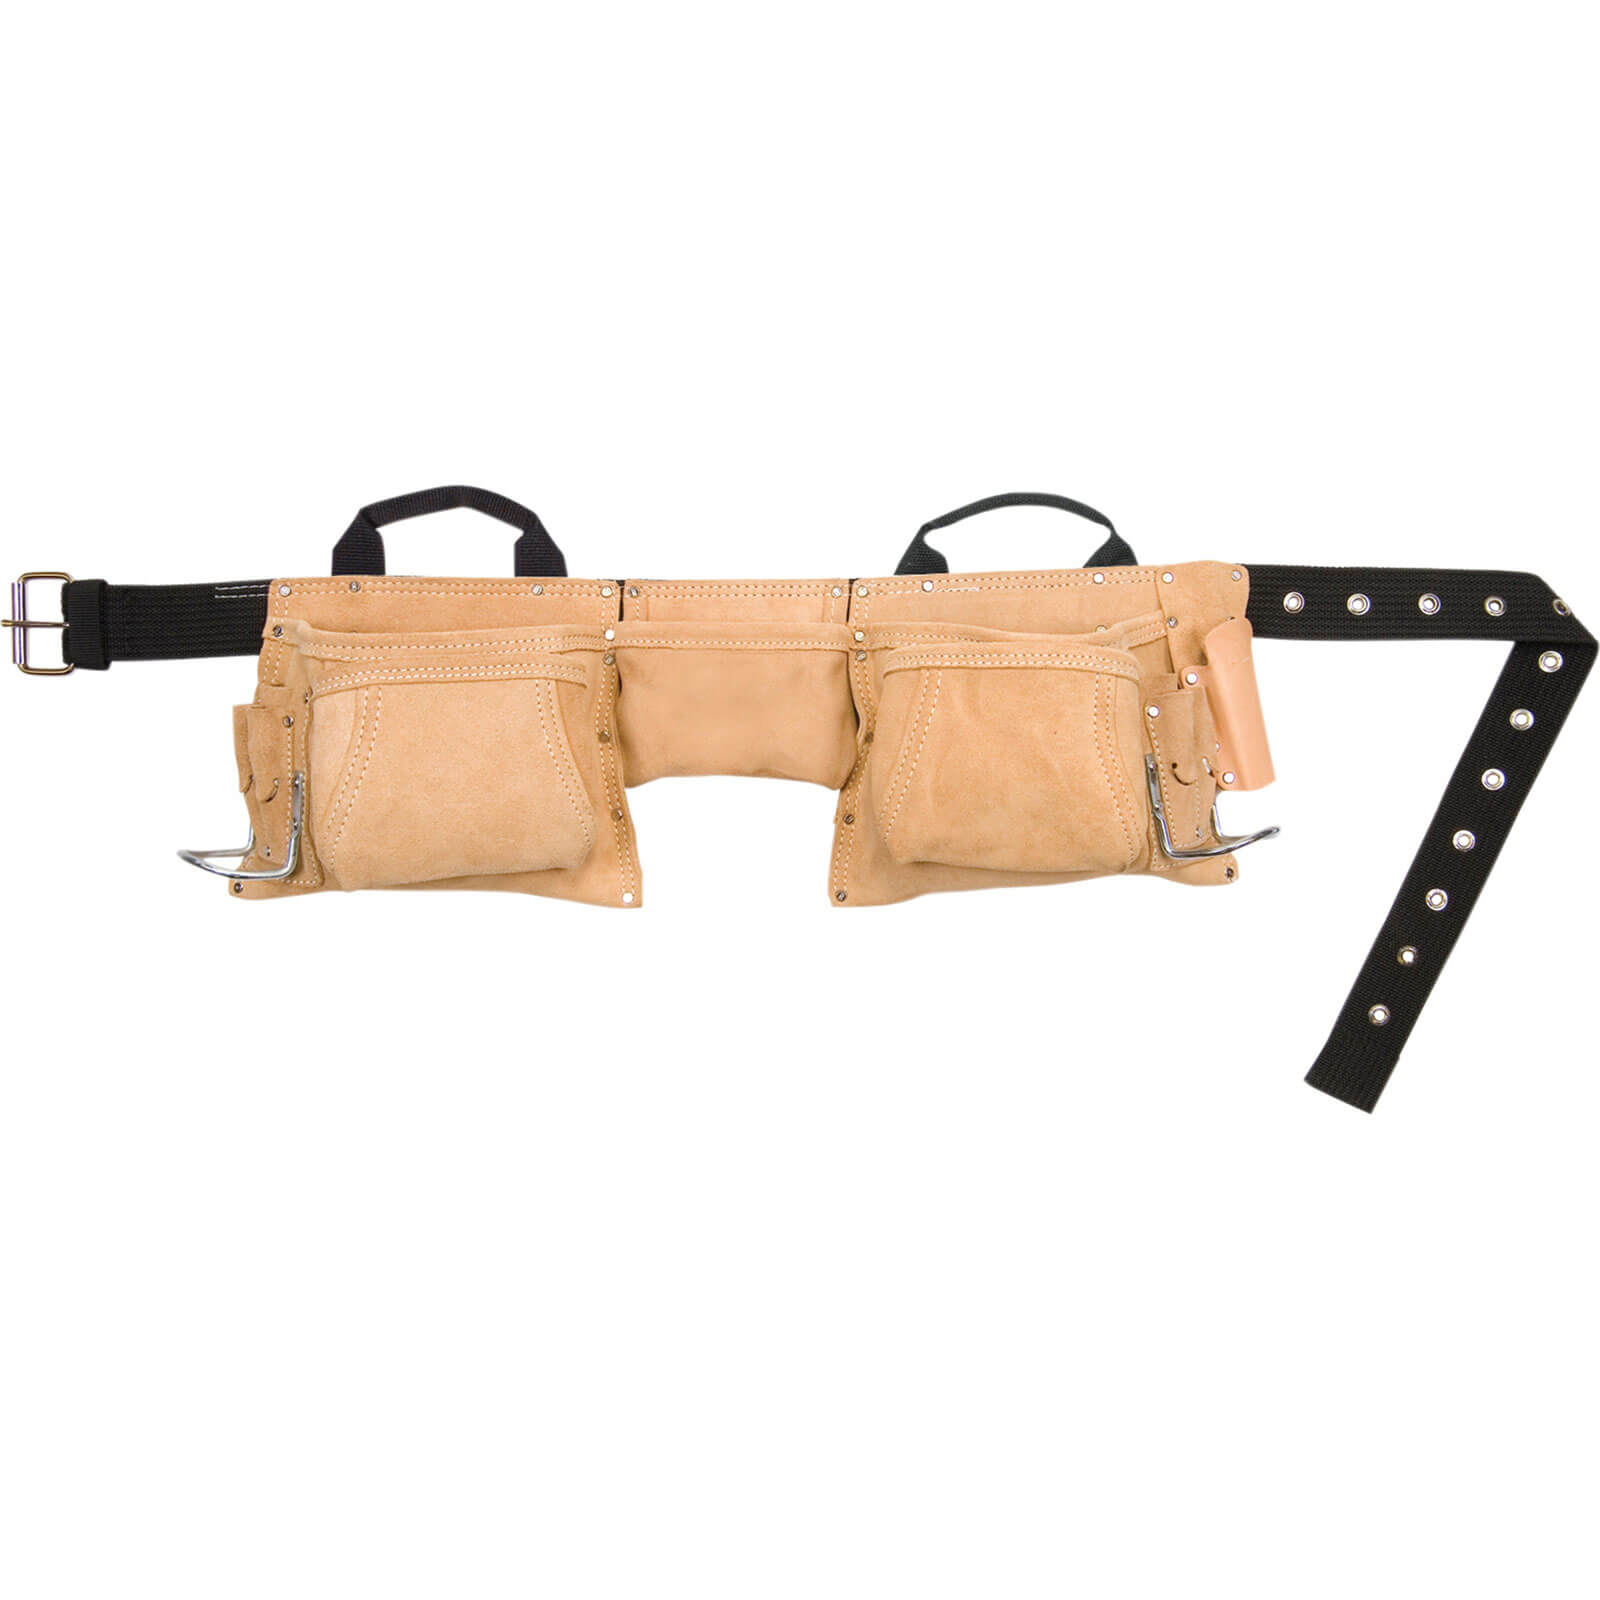 Image of Kunys Heavy Duty 12 Pocket Leather Tool Pouch